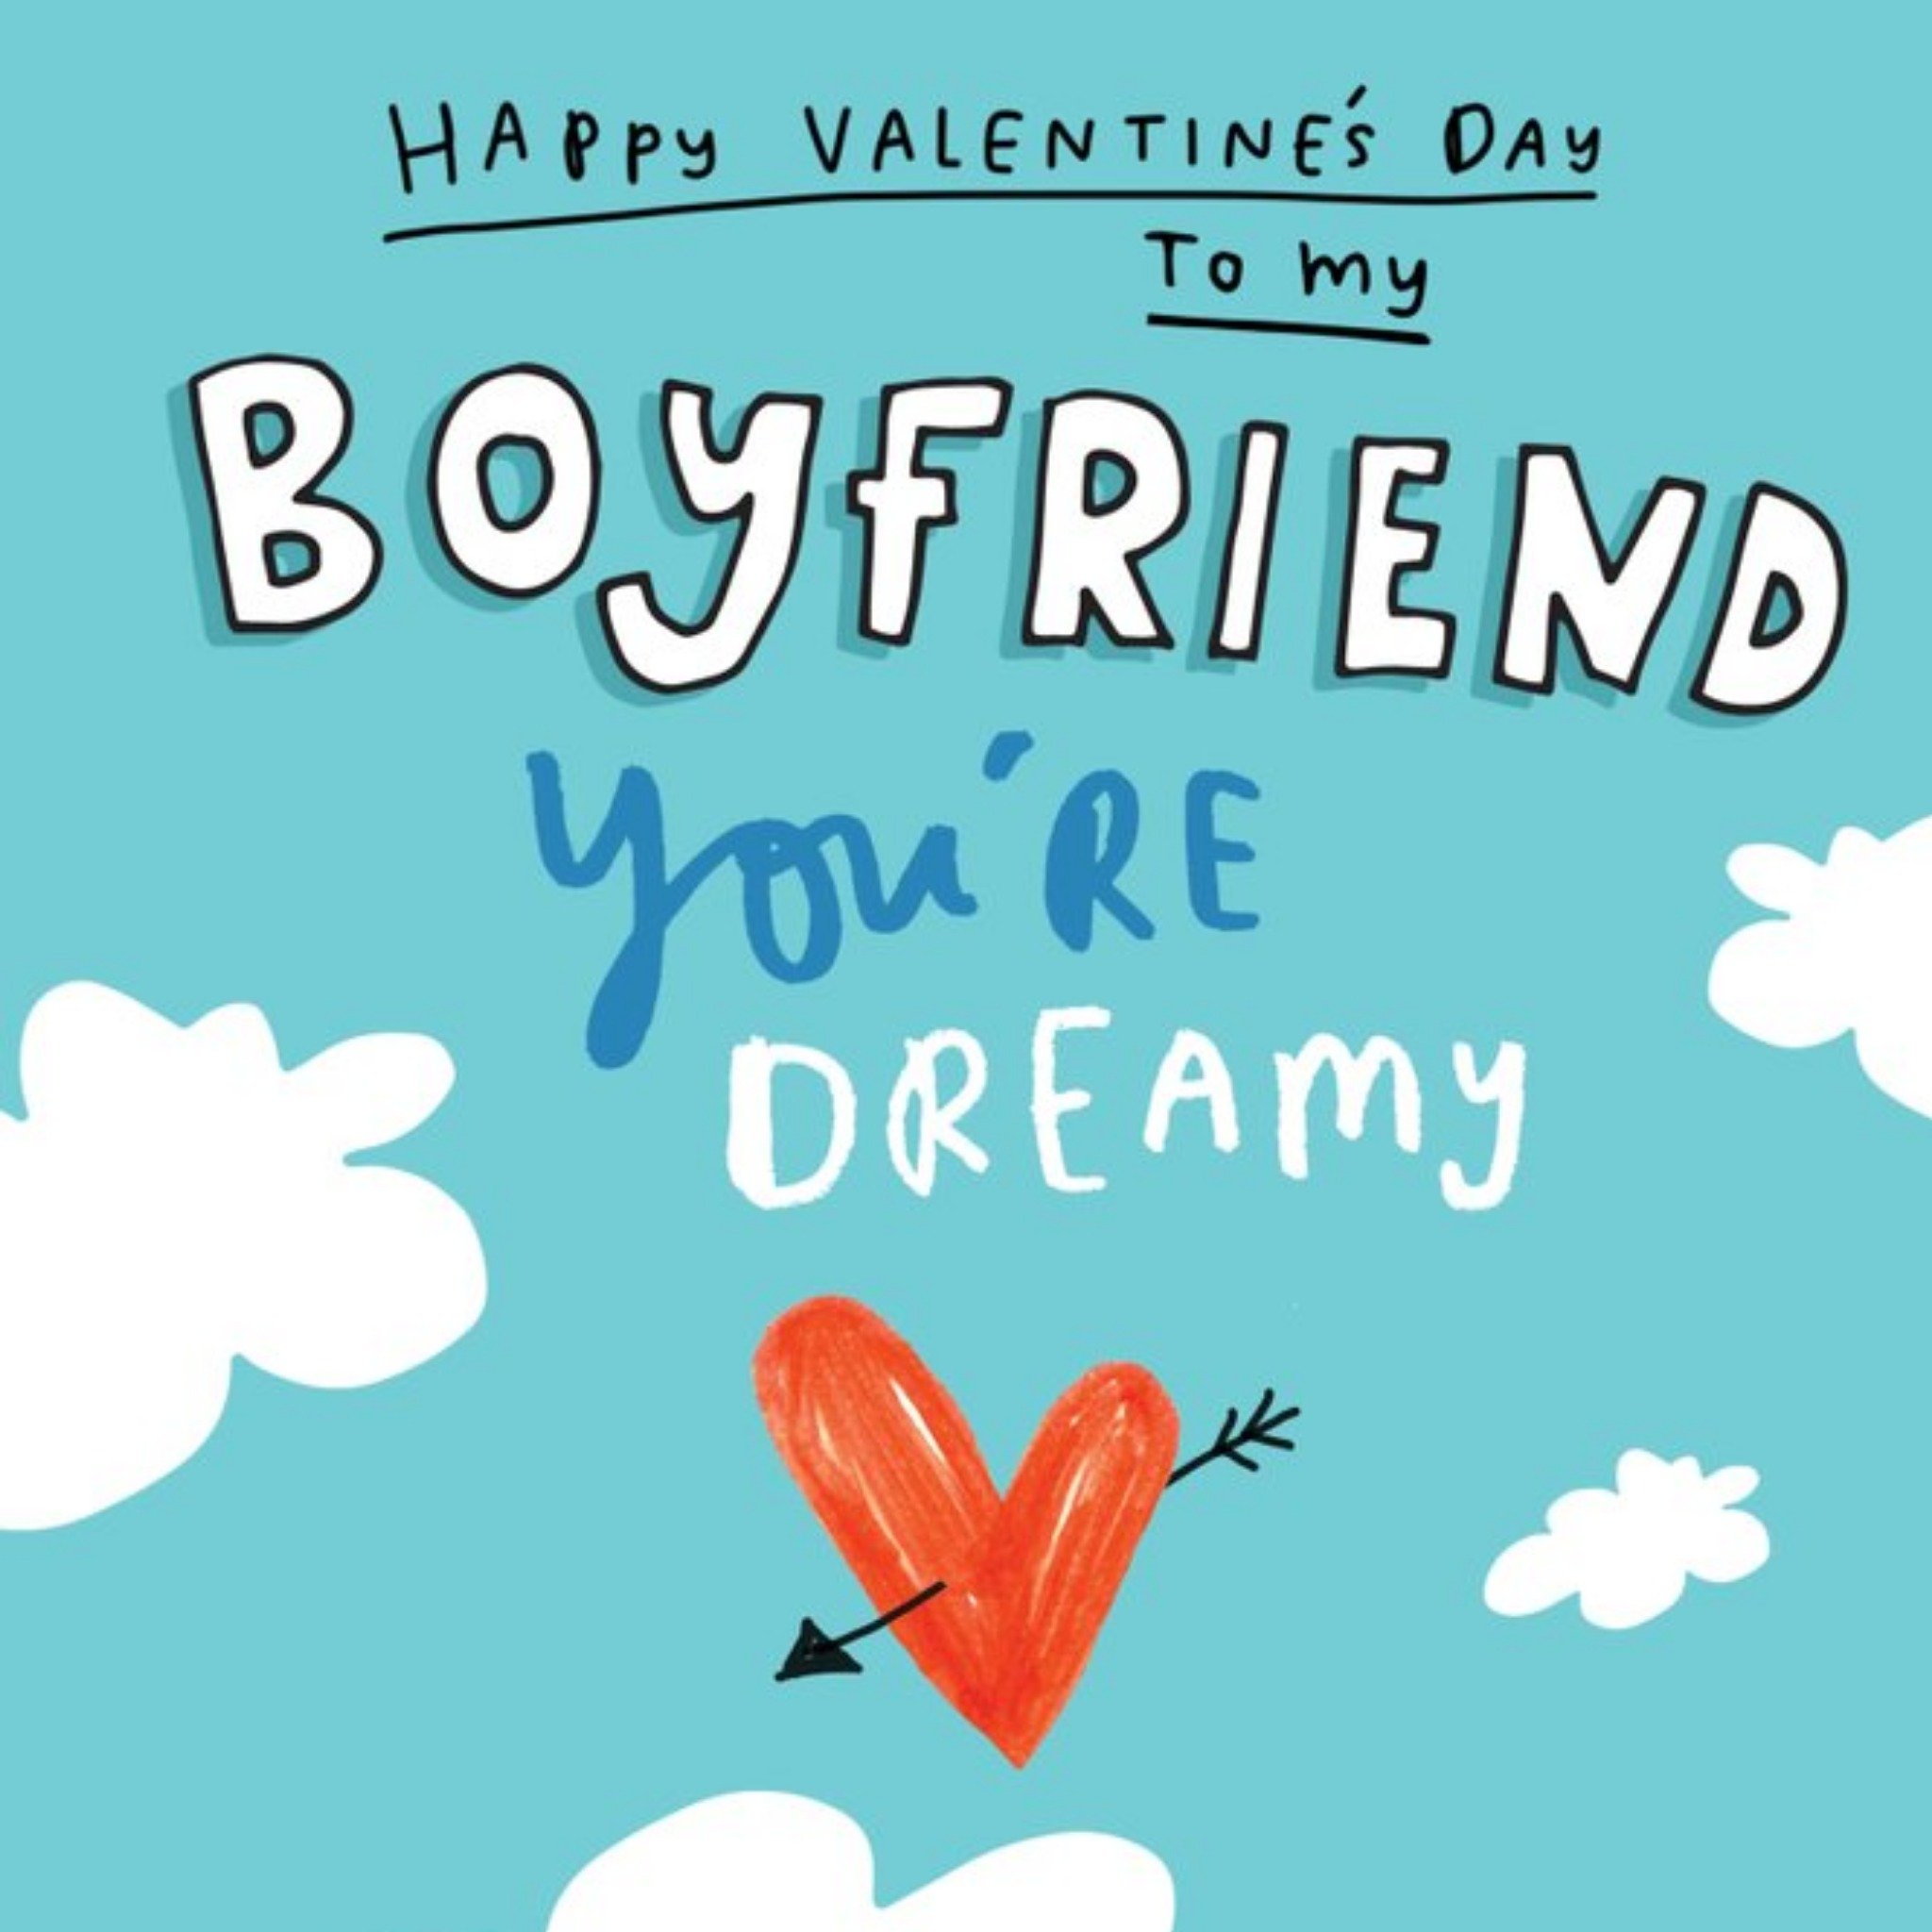 Moonpig You're Dreamy Boyfriend Valentine's Day Square Card, Large